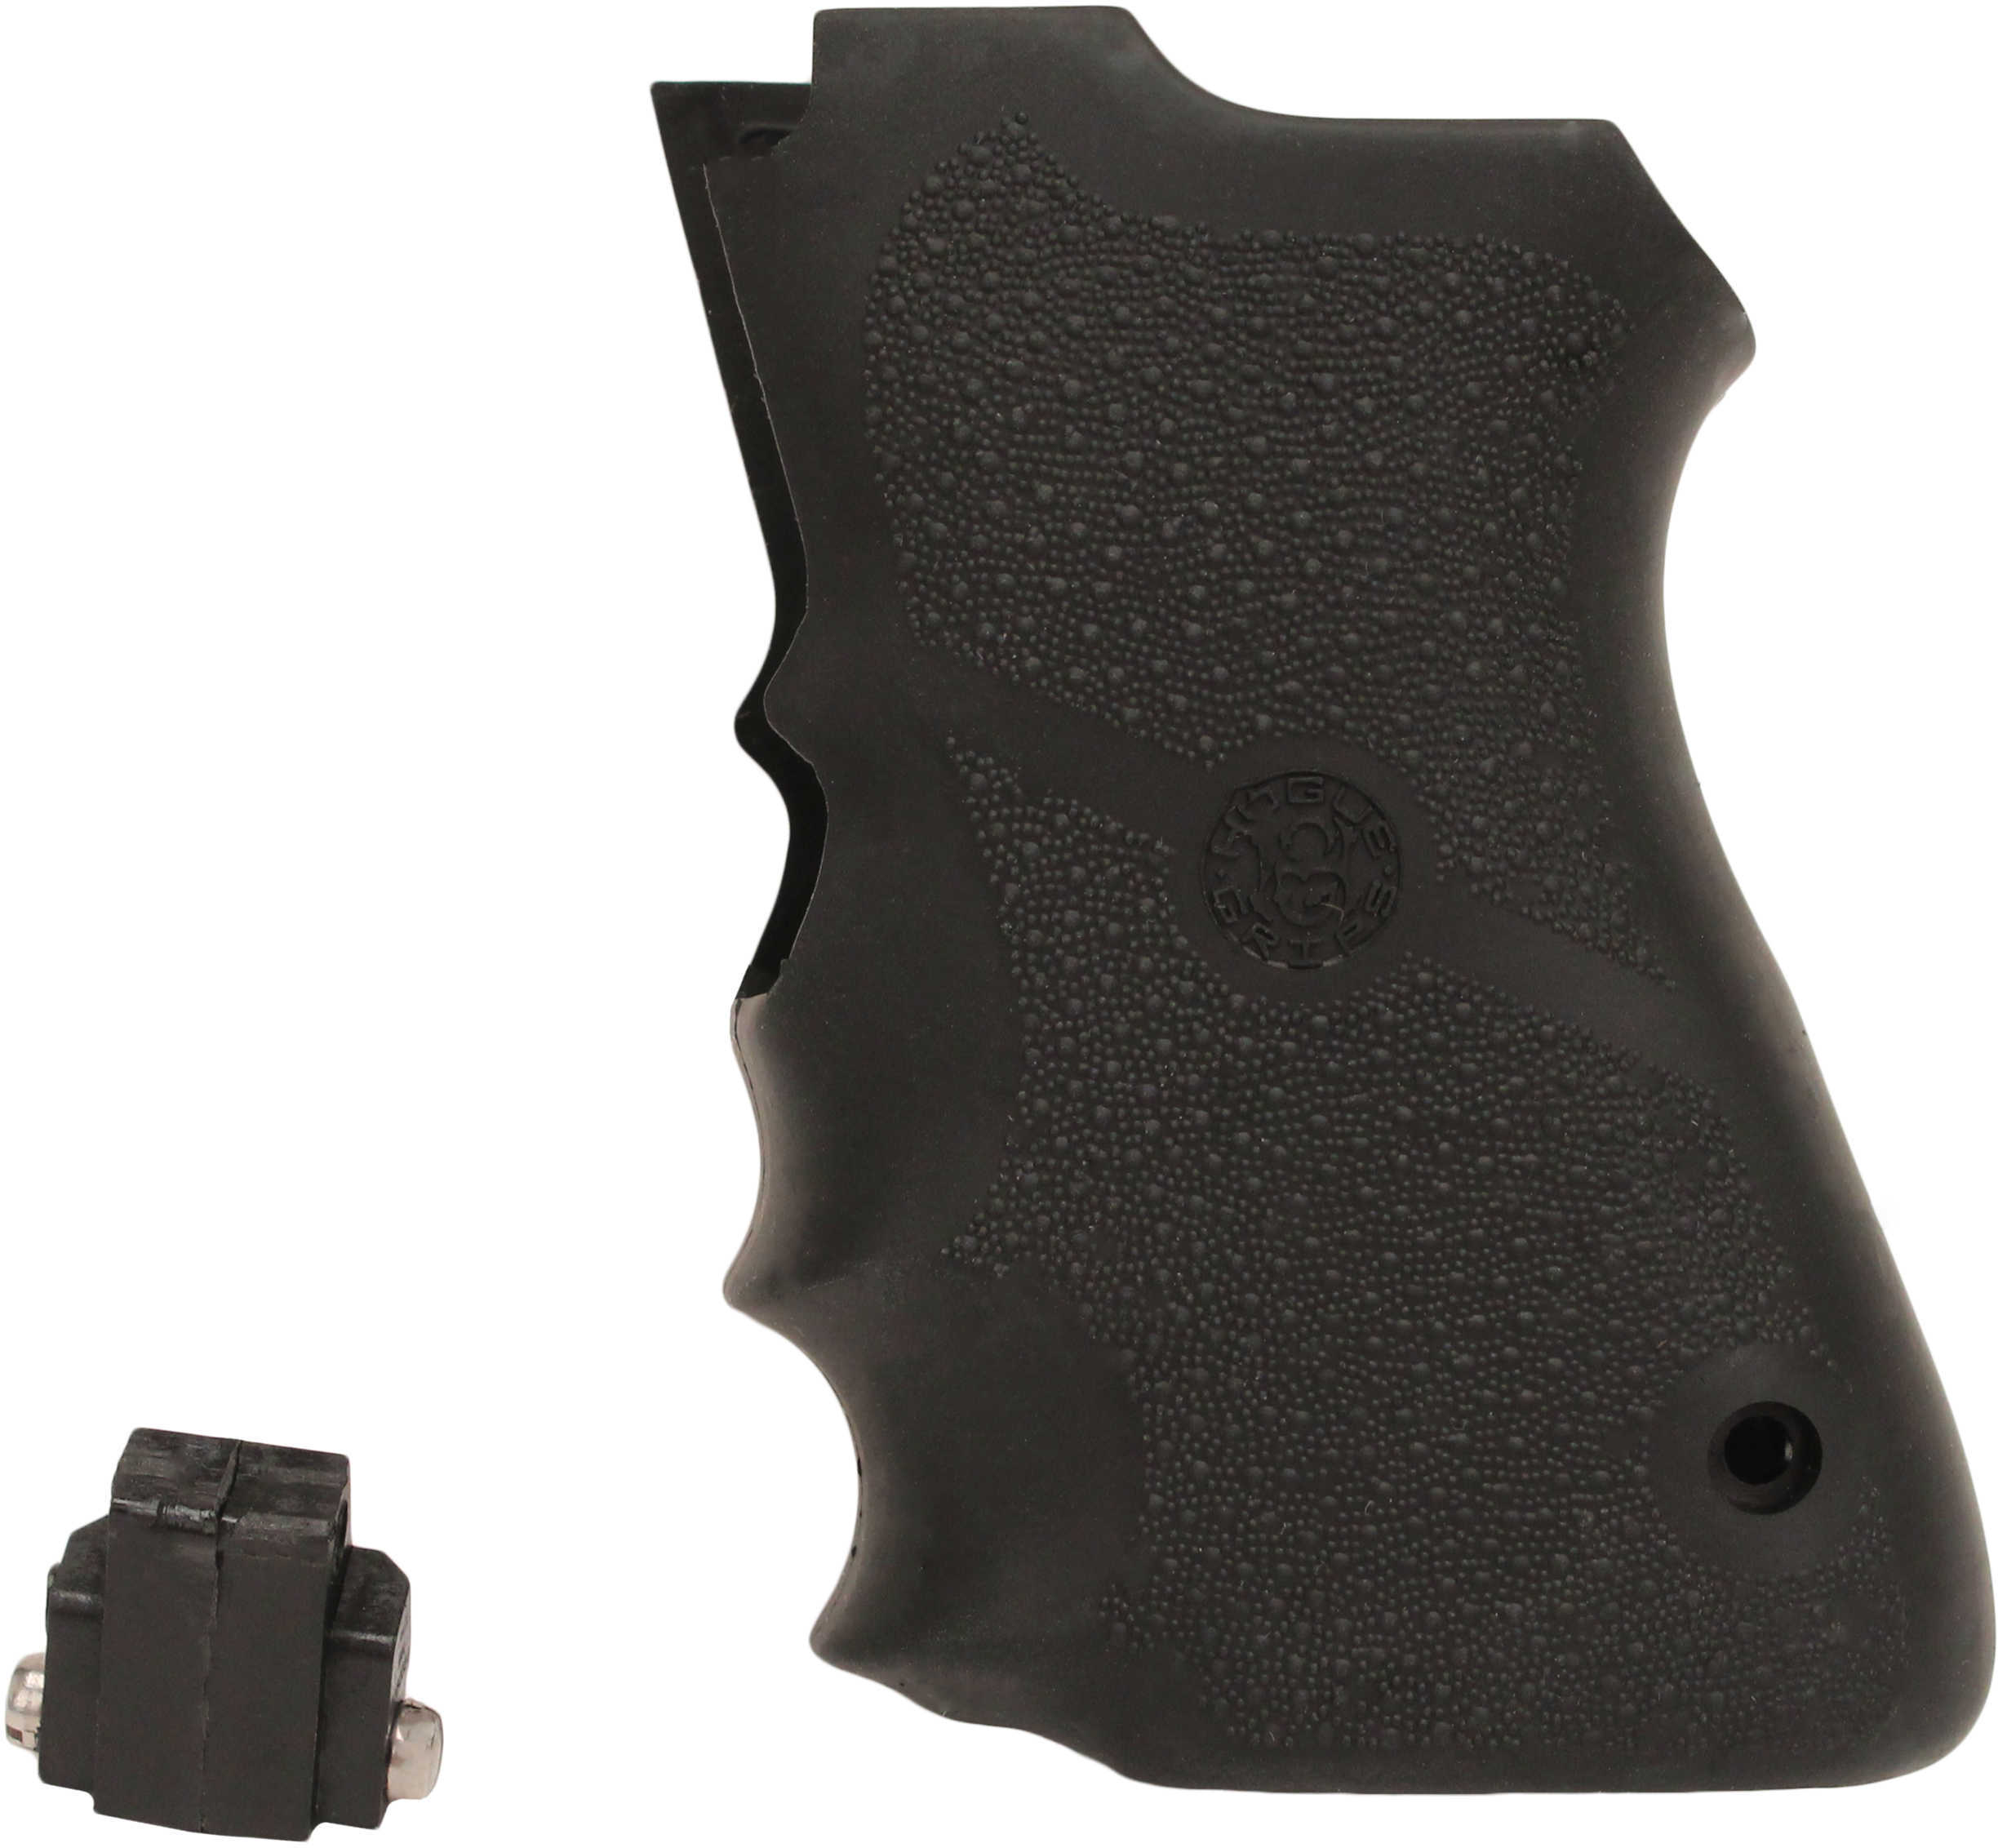 Hogue S&W 6906 Shorty 40 Rubber Grips With Finger Grooves